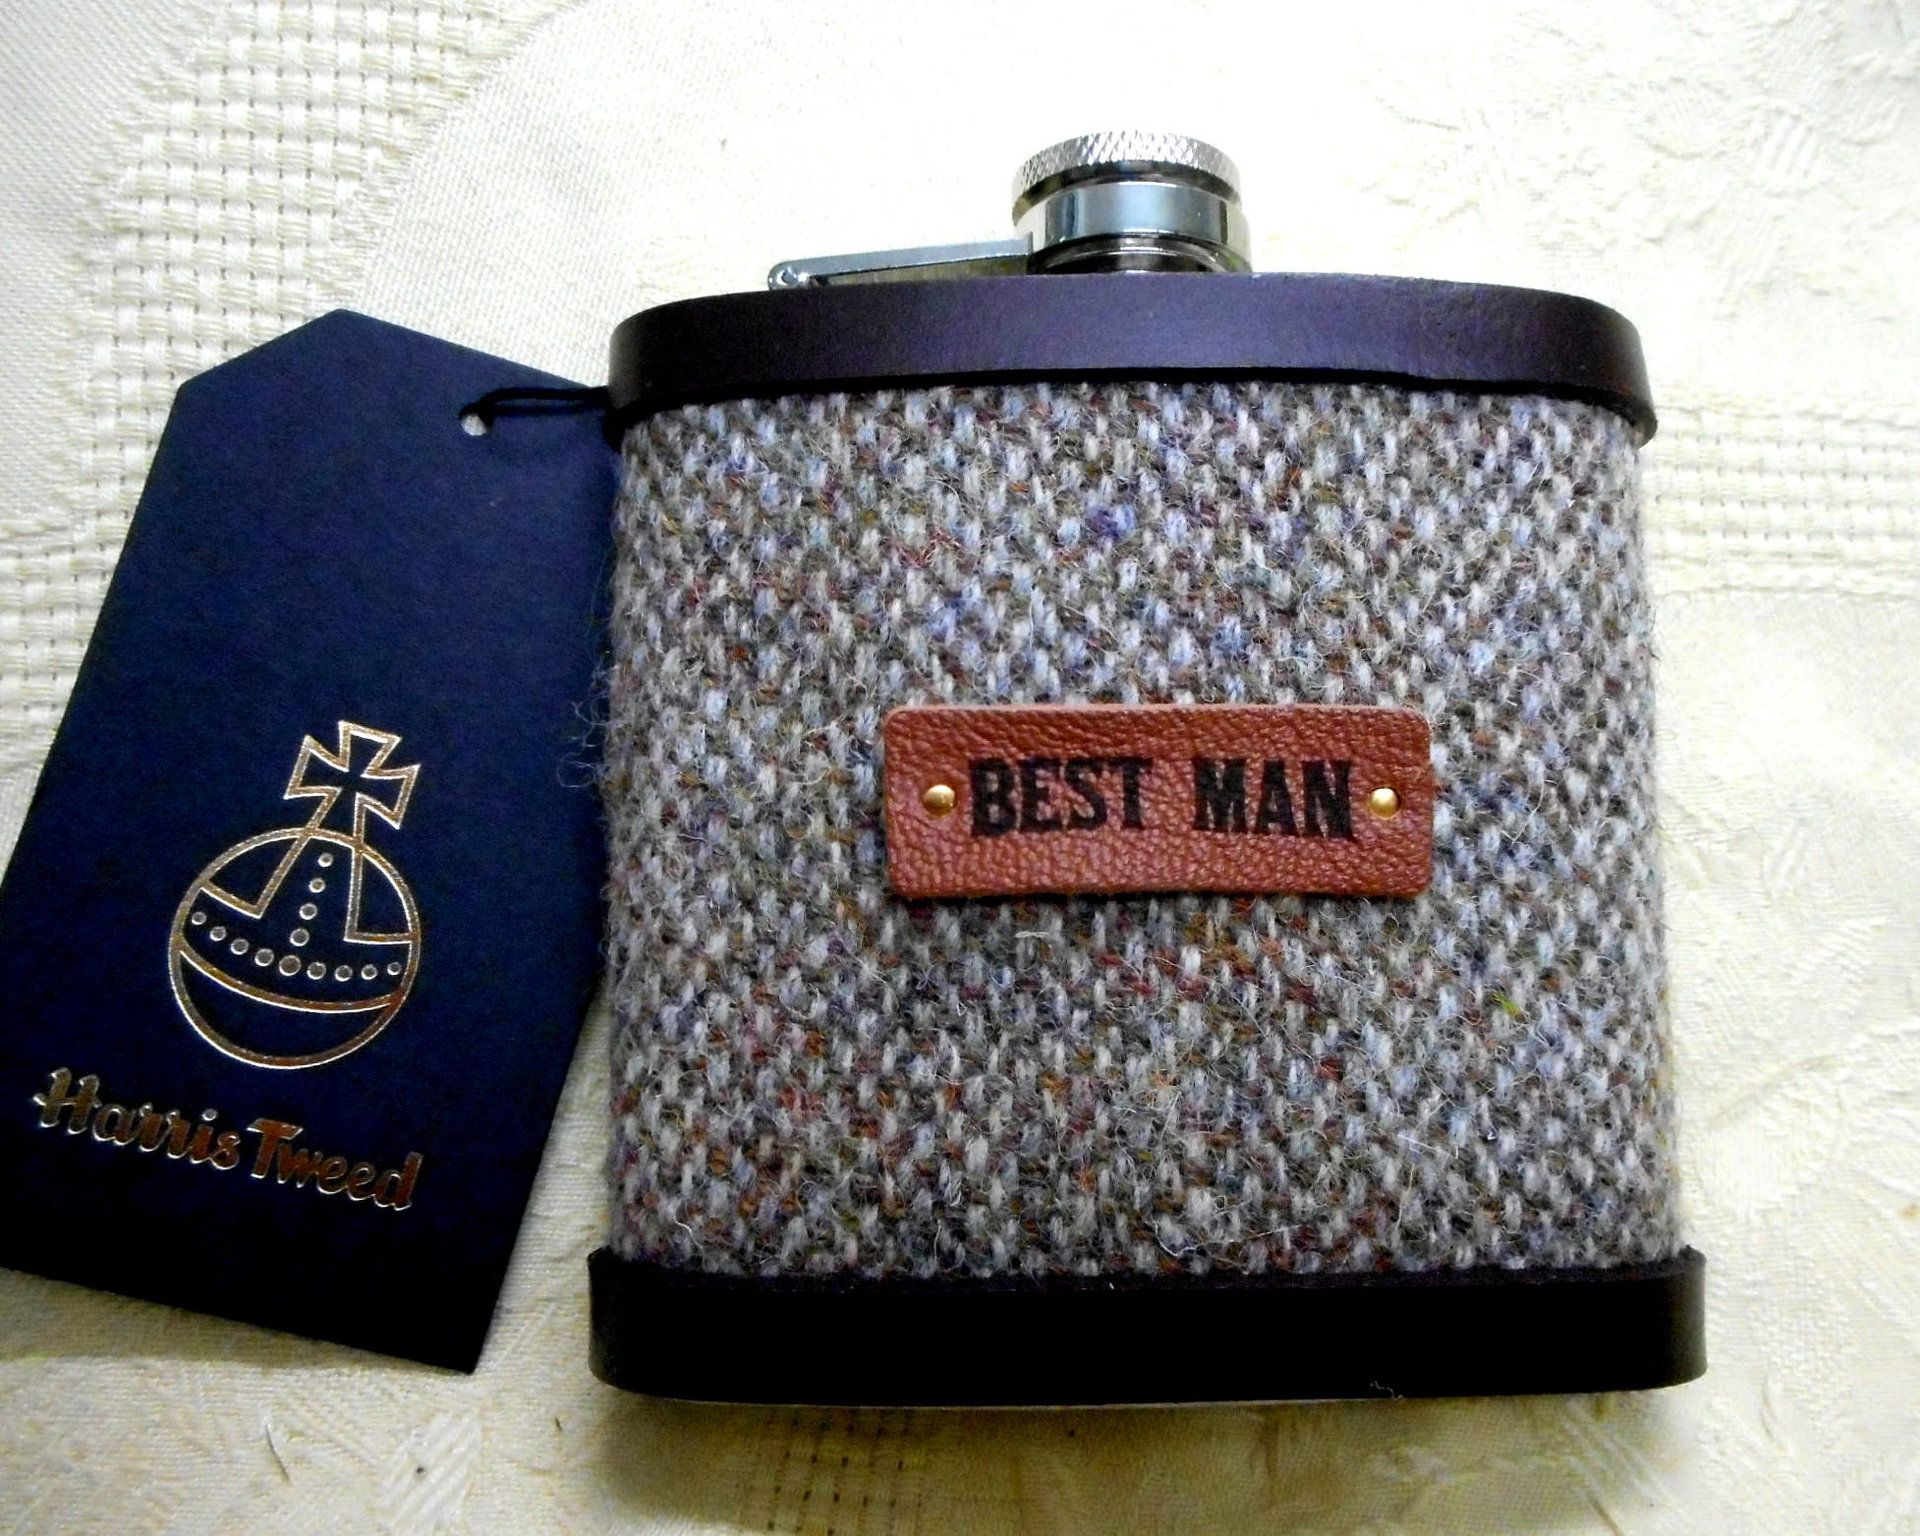 Best Man wedding gift Harris Tweed hip flask oatmeal beige brown , rustic rural  forest or woodland theme leather trimmed